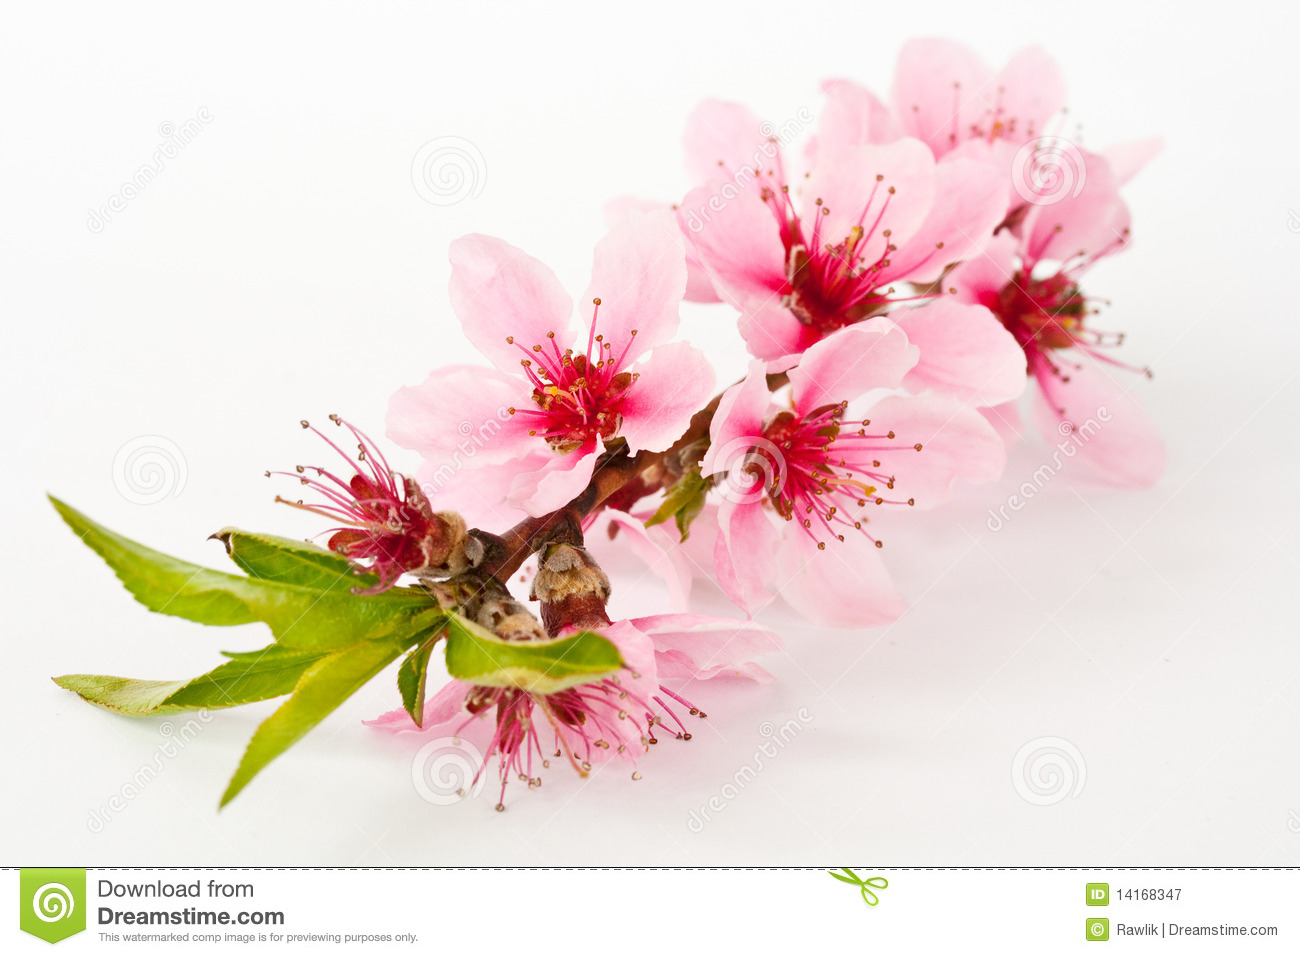 Peach Blossom Royalty Free Stock Photography   Image  14168347